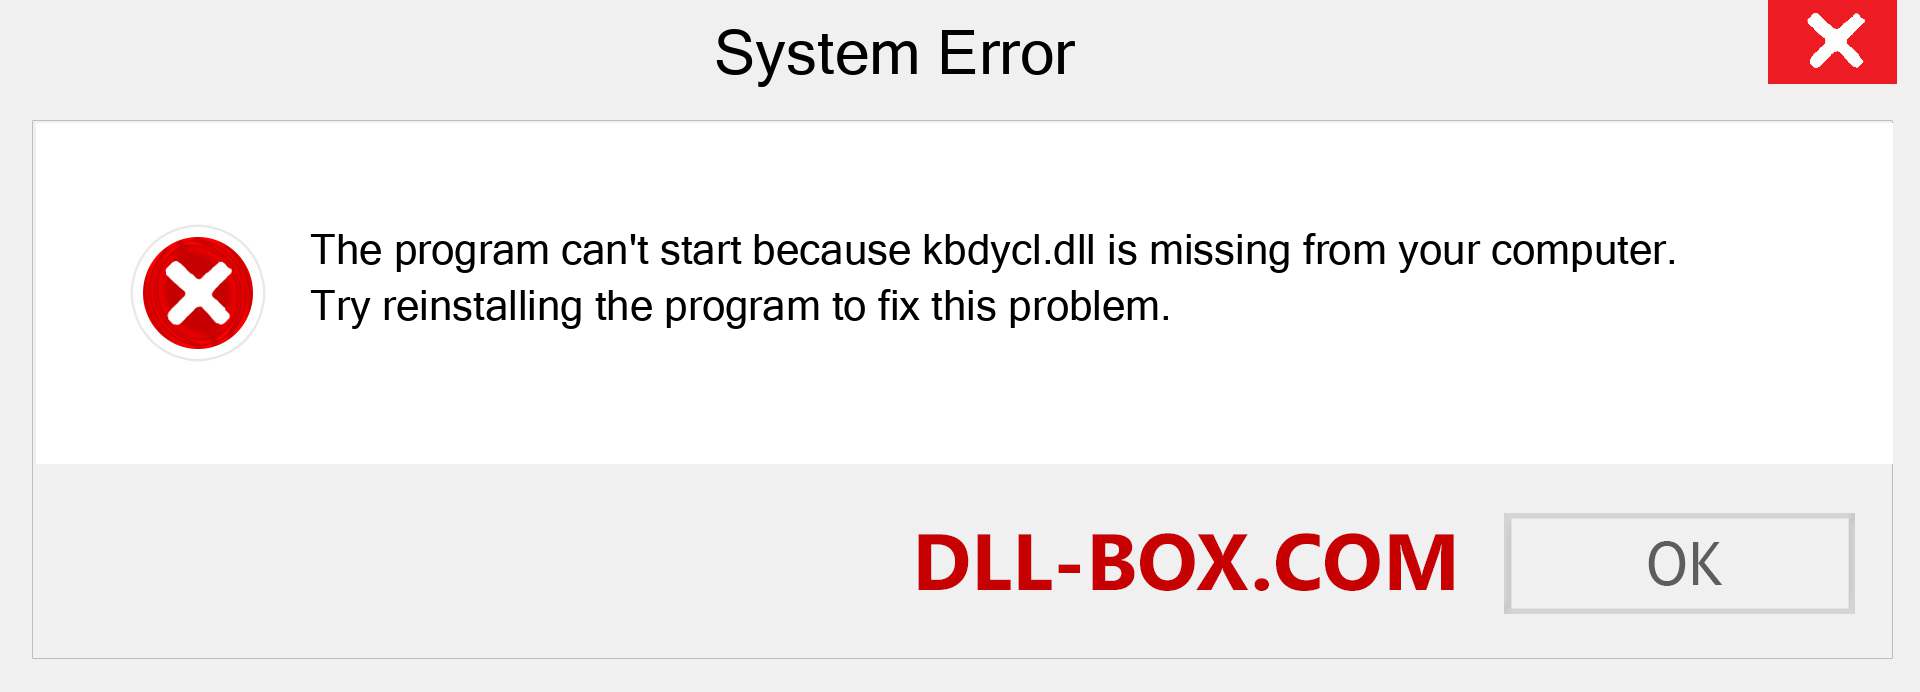  kbdycl.dll file is missing?. Download for Windows 7, 8, 10 - Fix  kbdycl dll Missing Error on Windows, photos, images